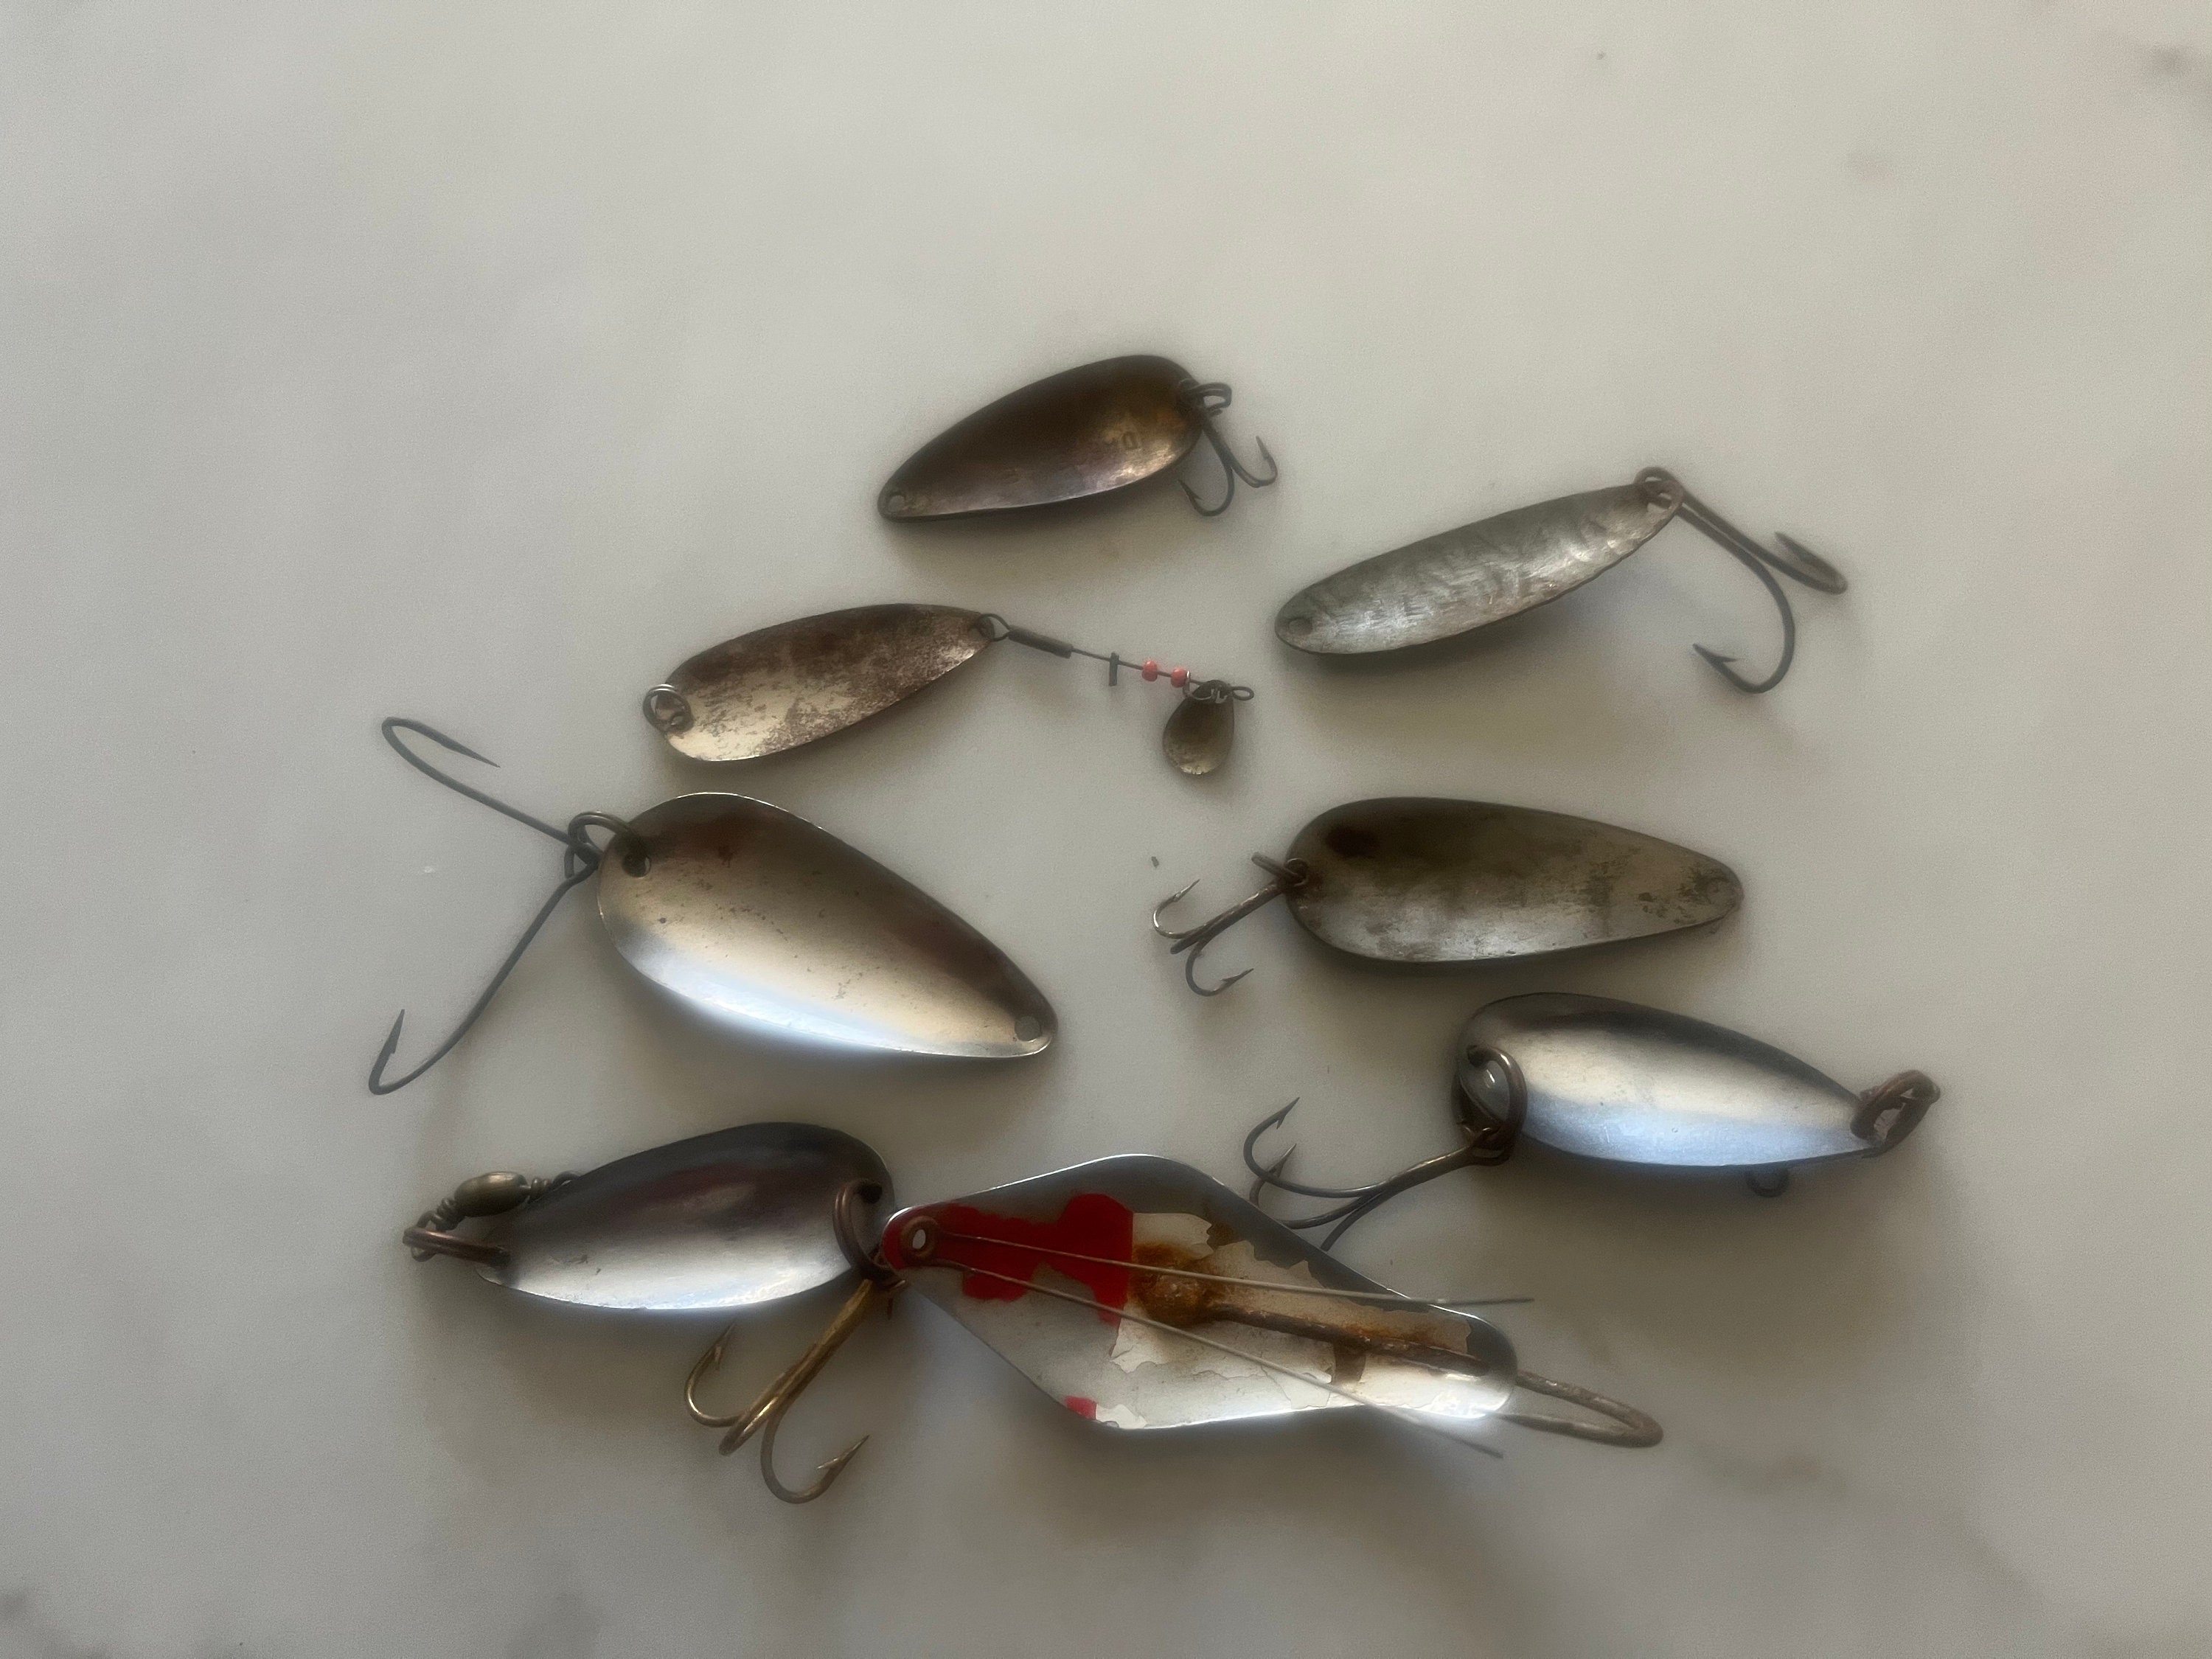 Collection of 8 Vintage Spoon Daredevil-like Lures -  Canada